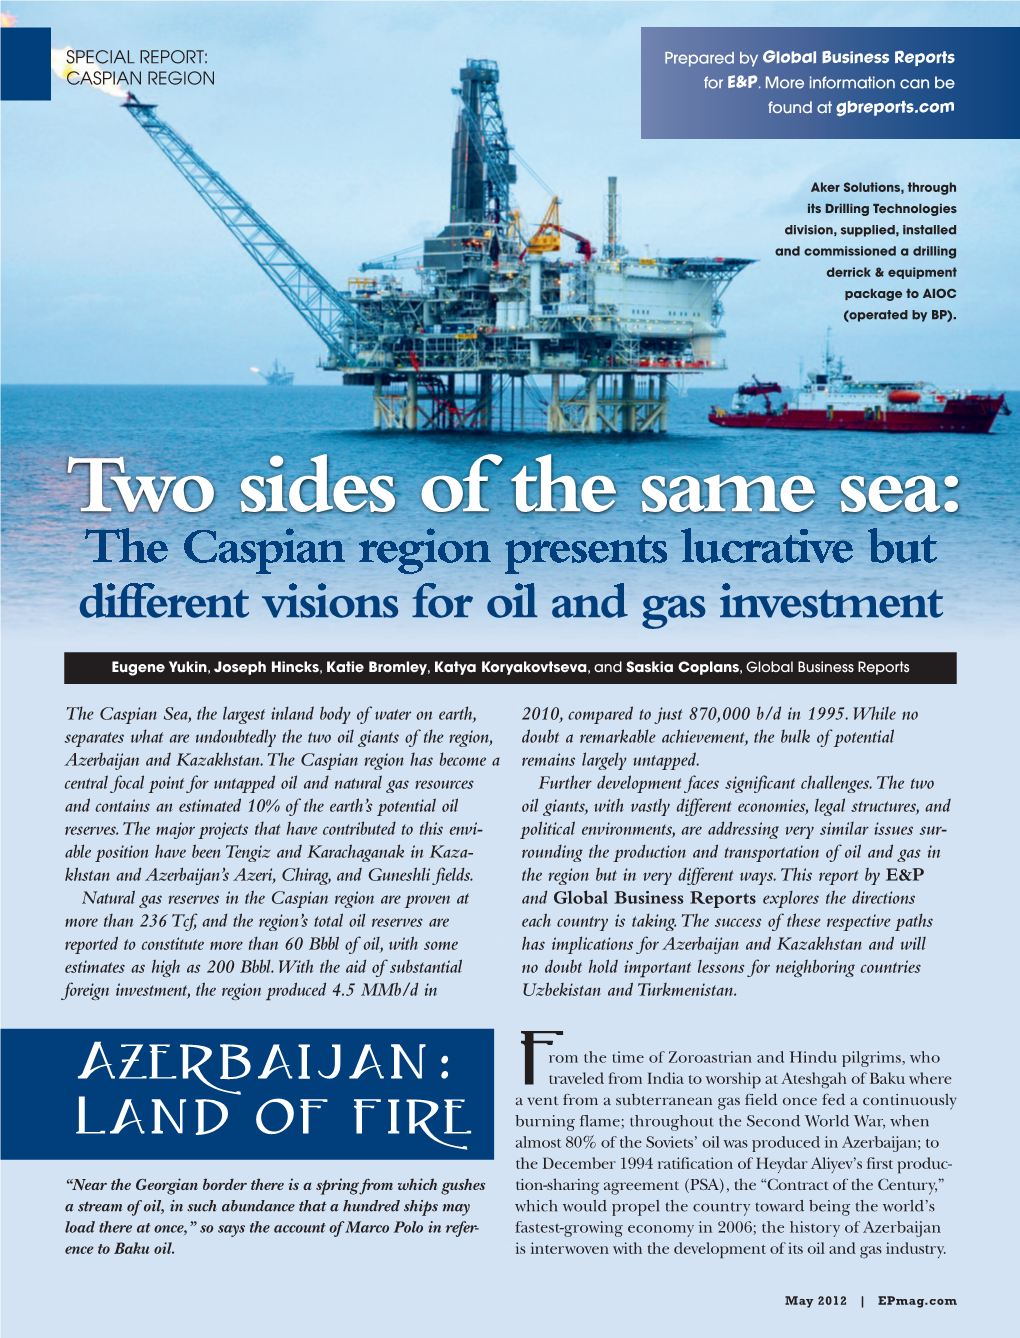 Two Sides of the Same Sea: the Caspian Region Presents Lucrative but Different Visions for Oil and Gas Investment